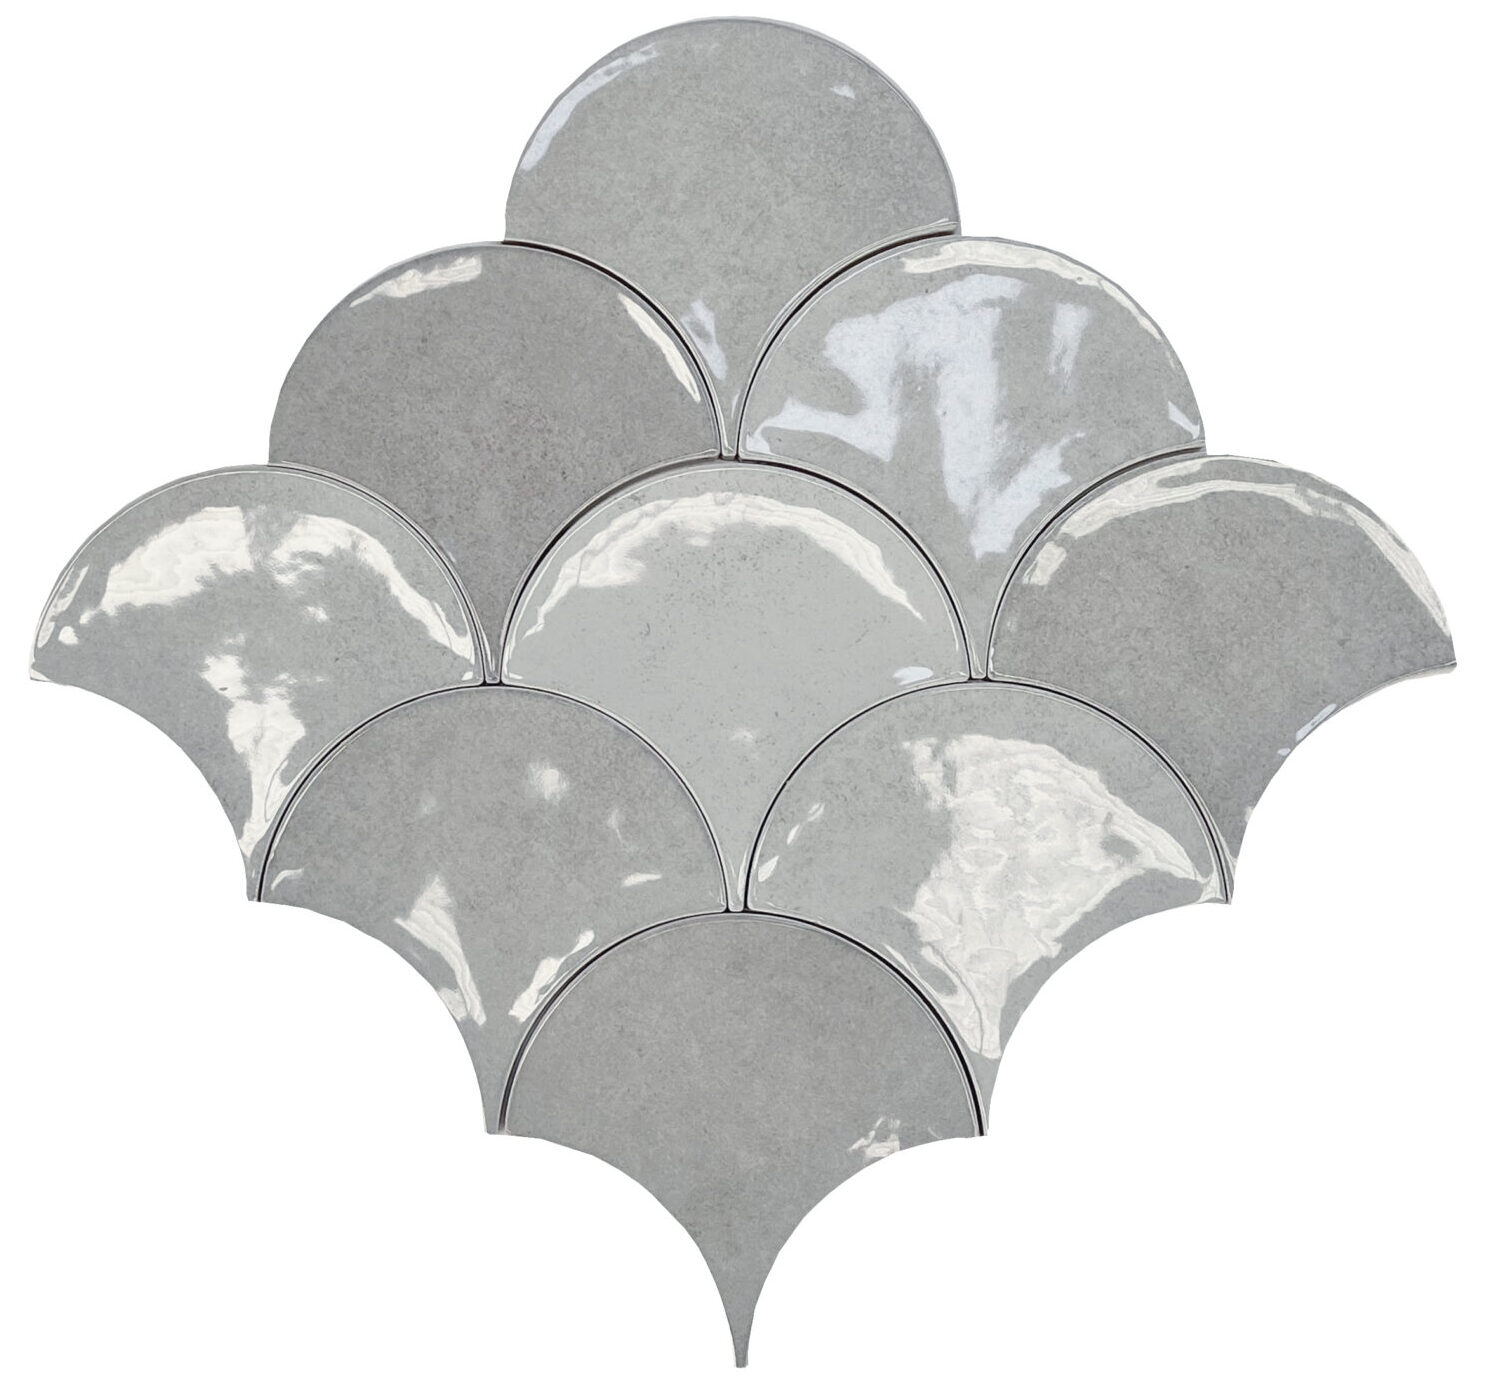 Grey fishscale wall tiles with shade variations and glossy finish